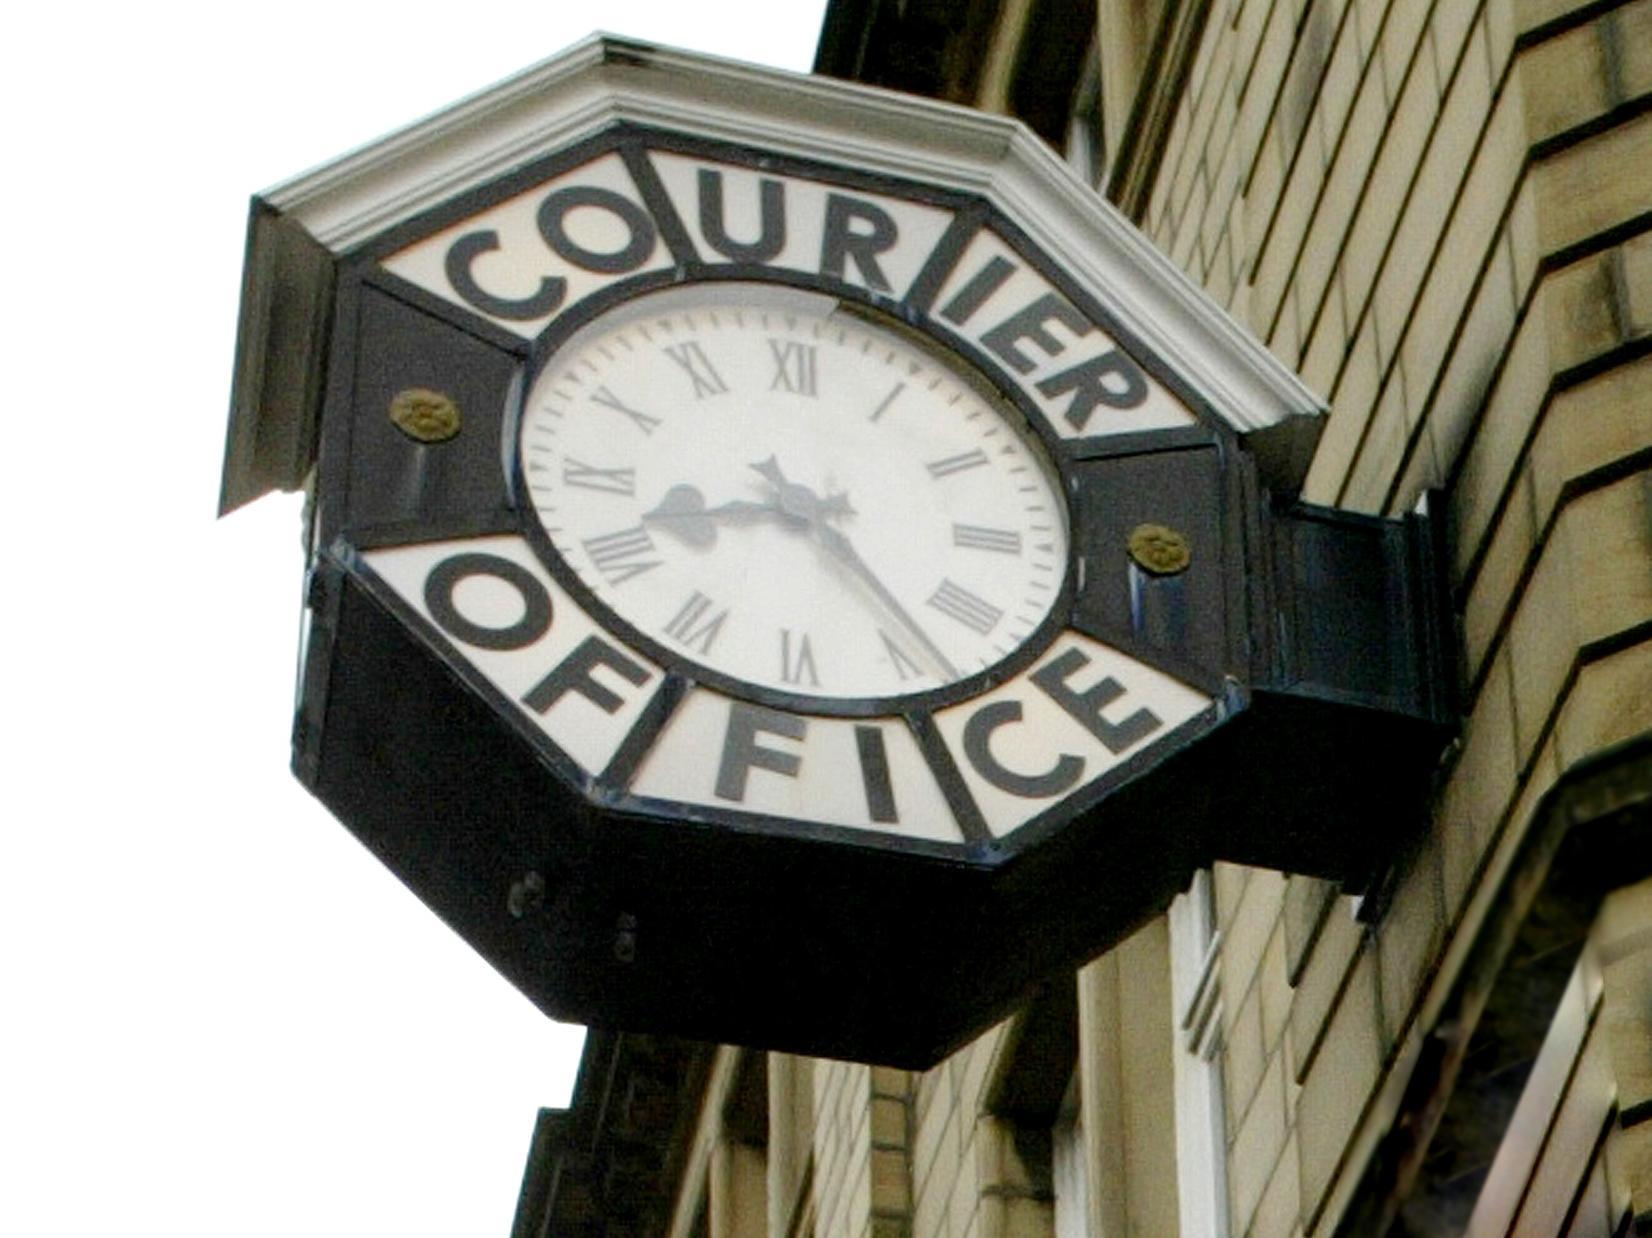 Up until 2015 the offices of the Halifax Courier were located on King Cross Street. The paper is now produced from an office at Dean Clough.